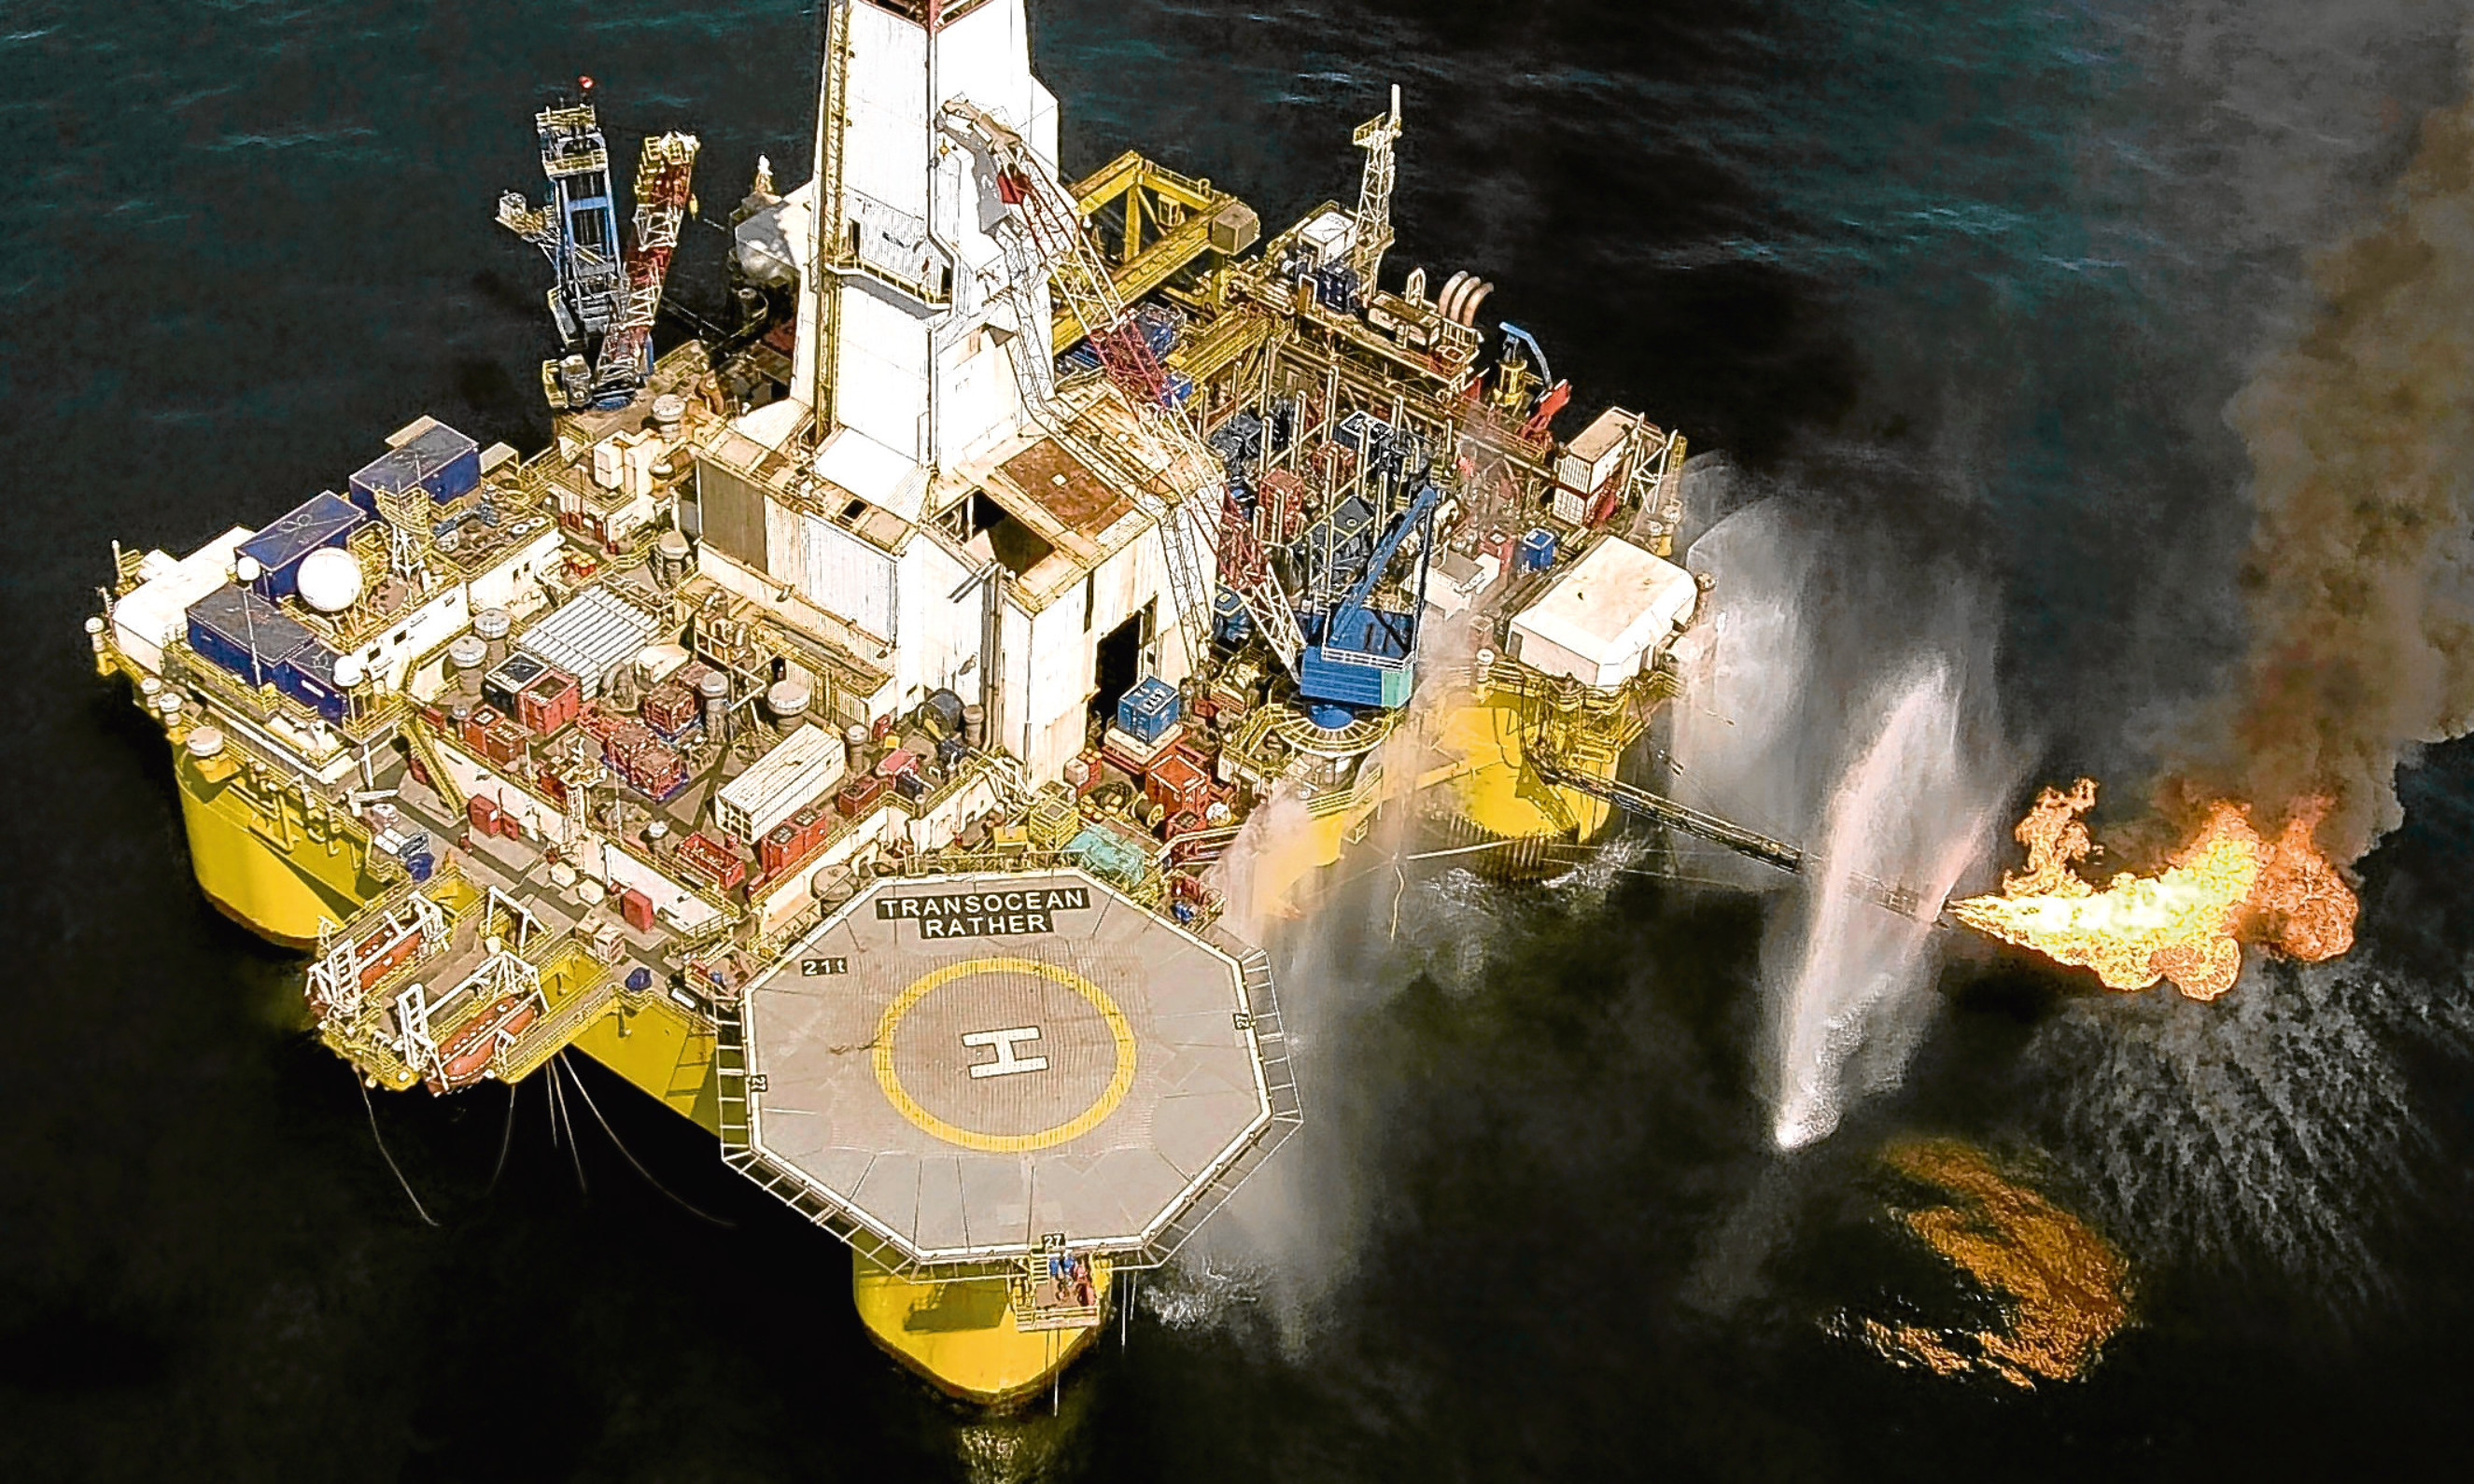 An oil rig in the North Sea